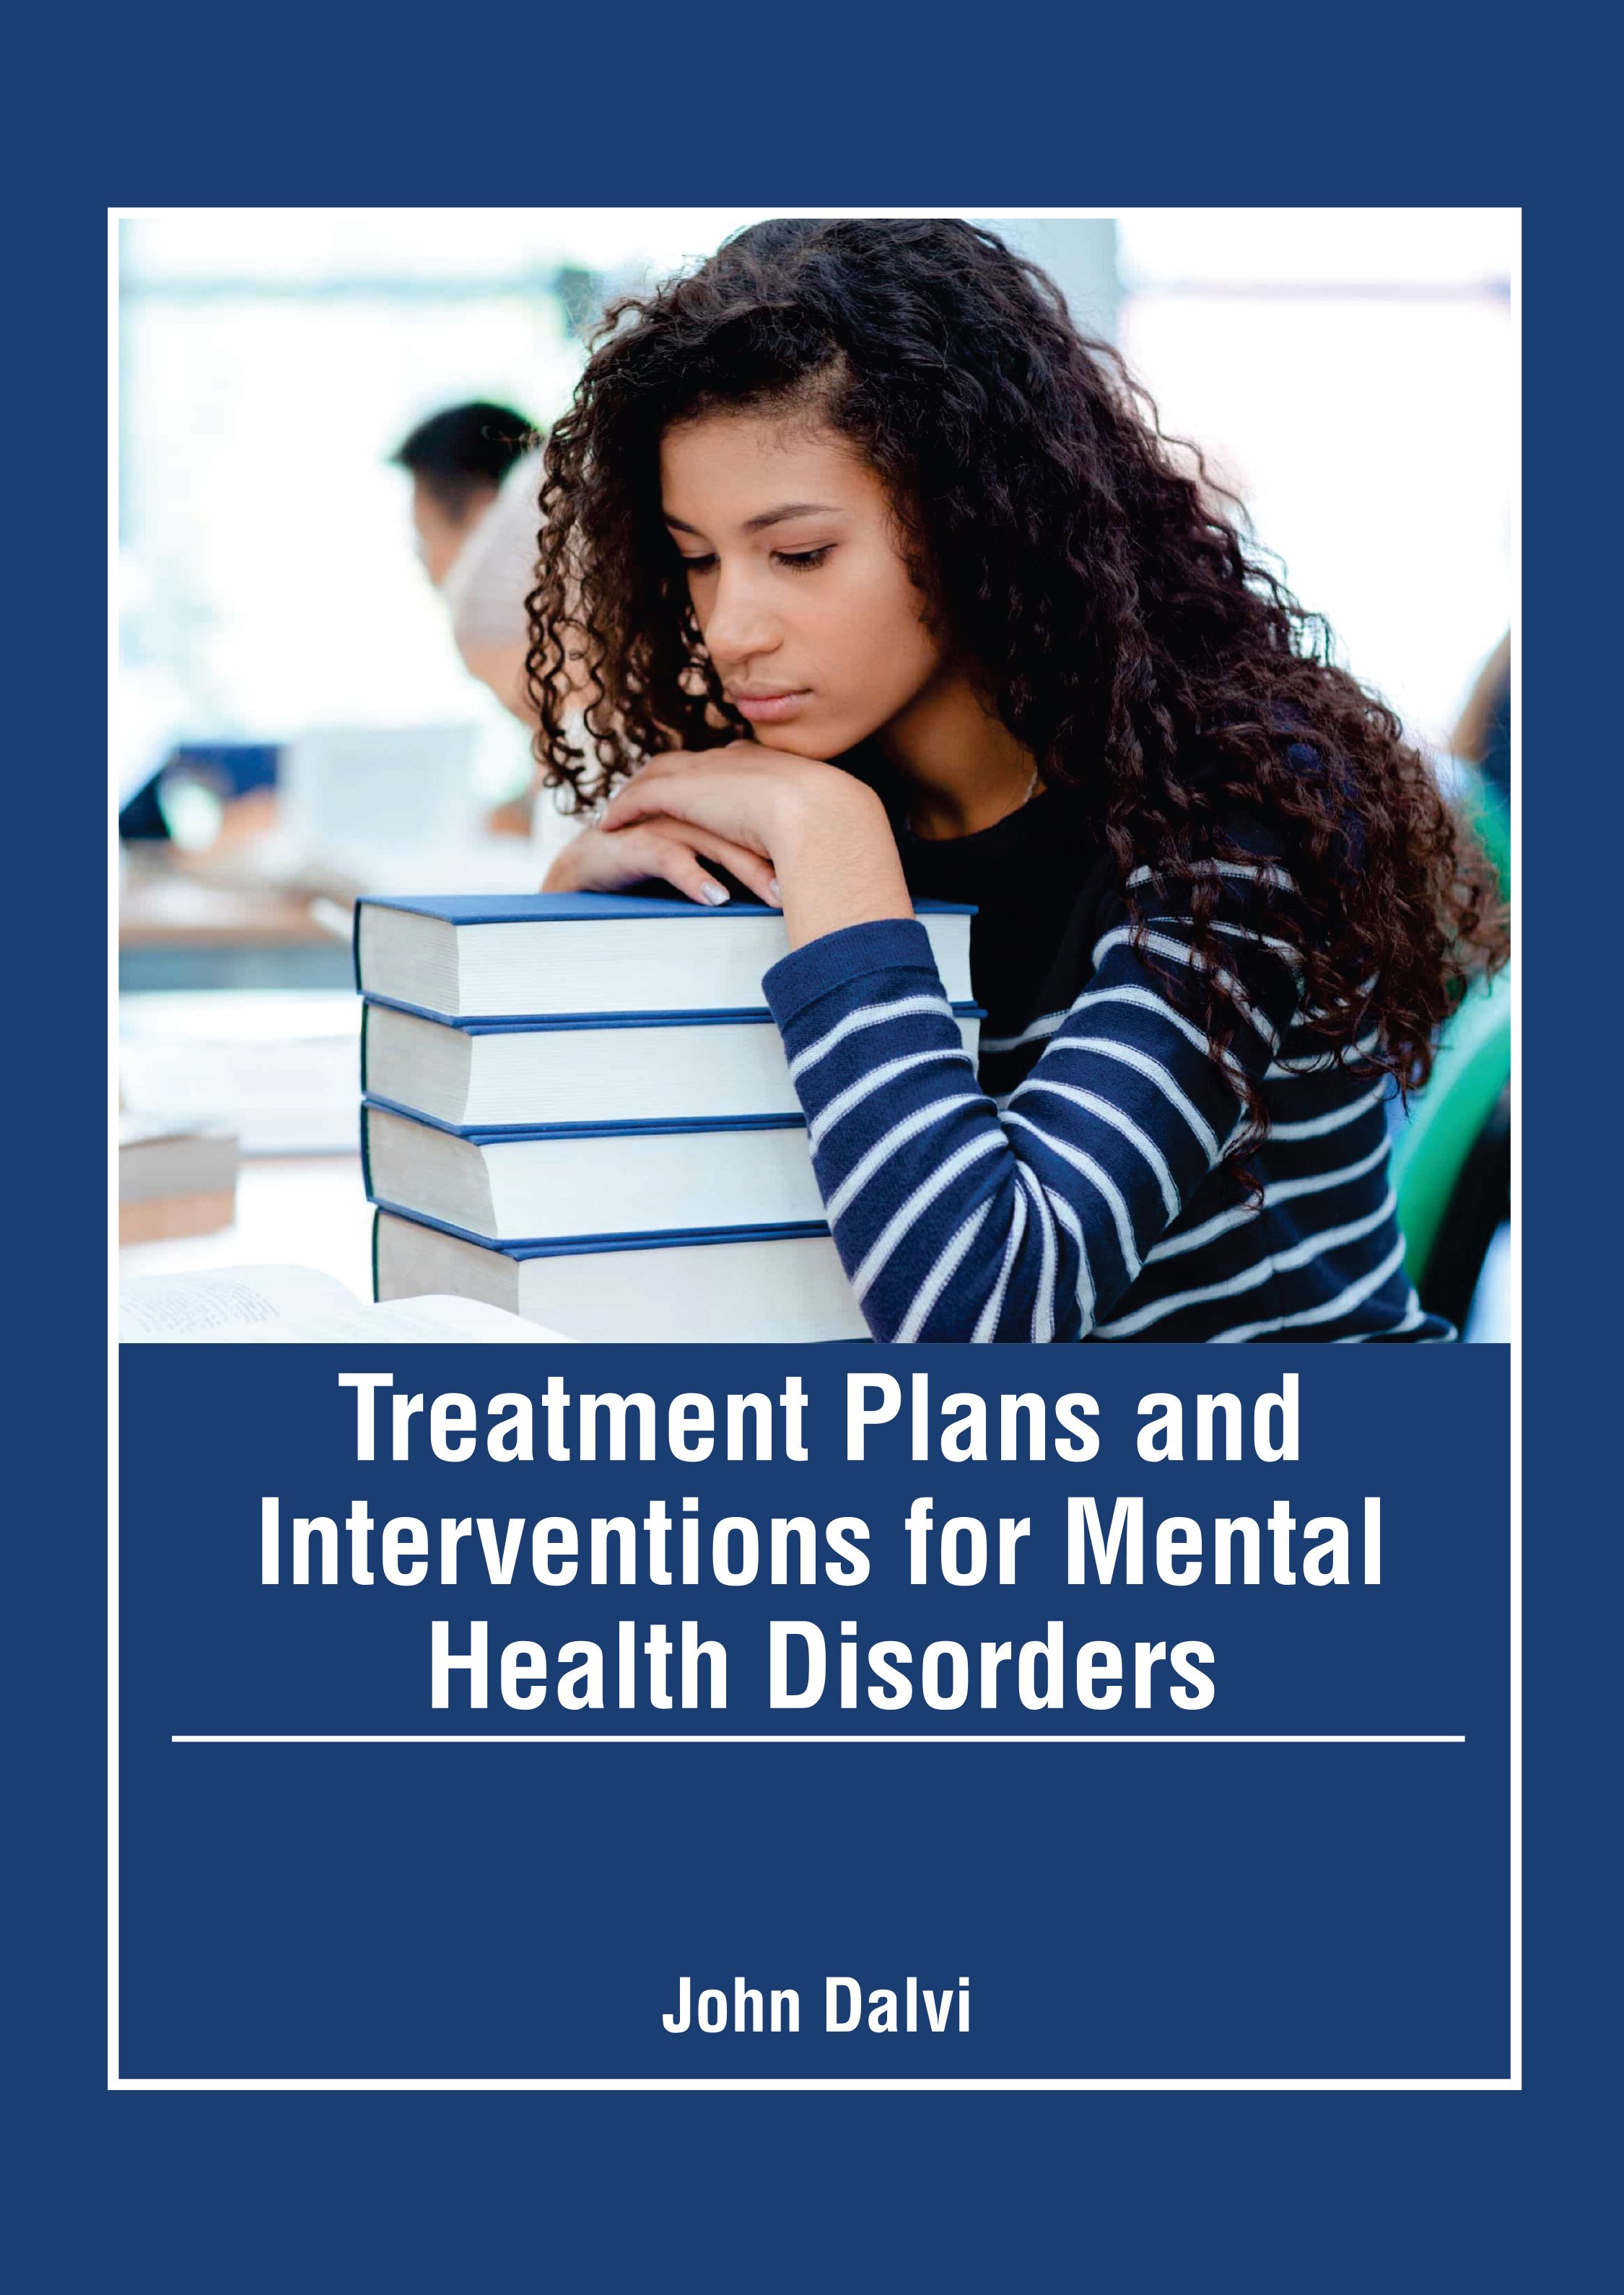 

exclusive-publishers/american-medical-publishers/treatment-plans-and-interventions-for-mental-health-disorders-9798887405360